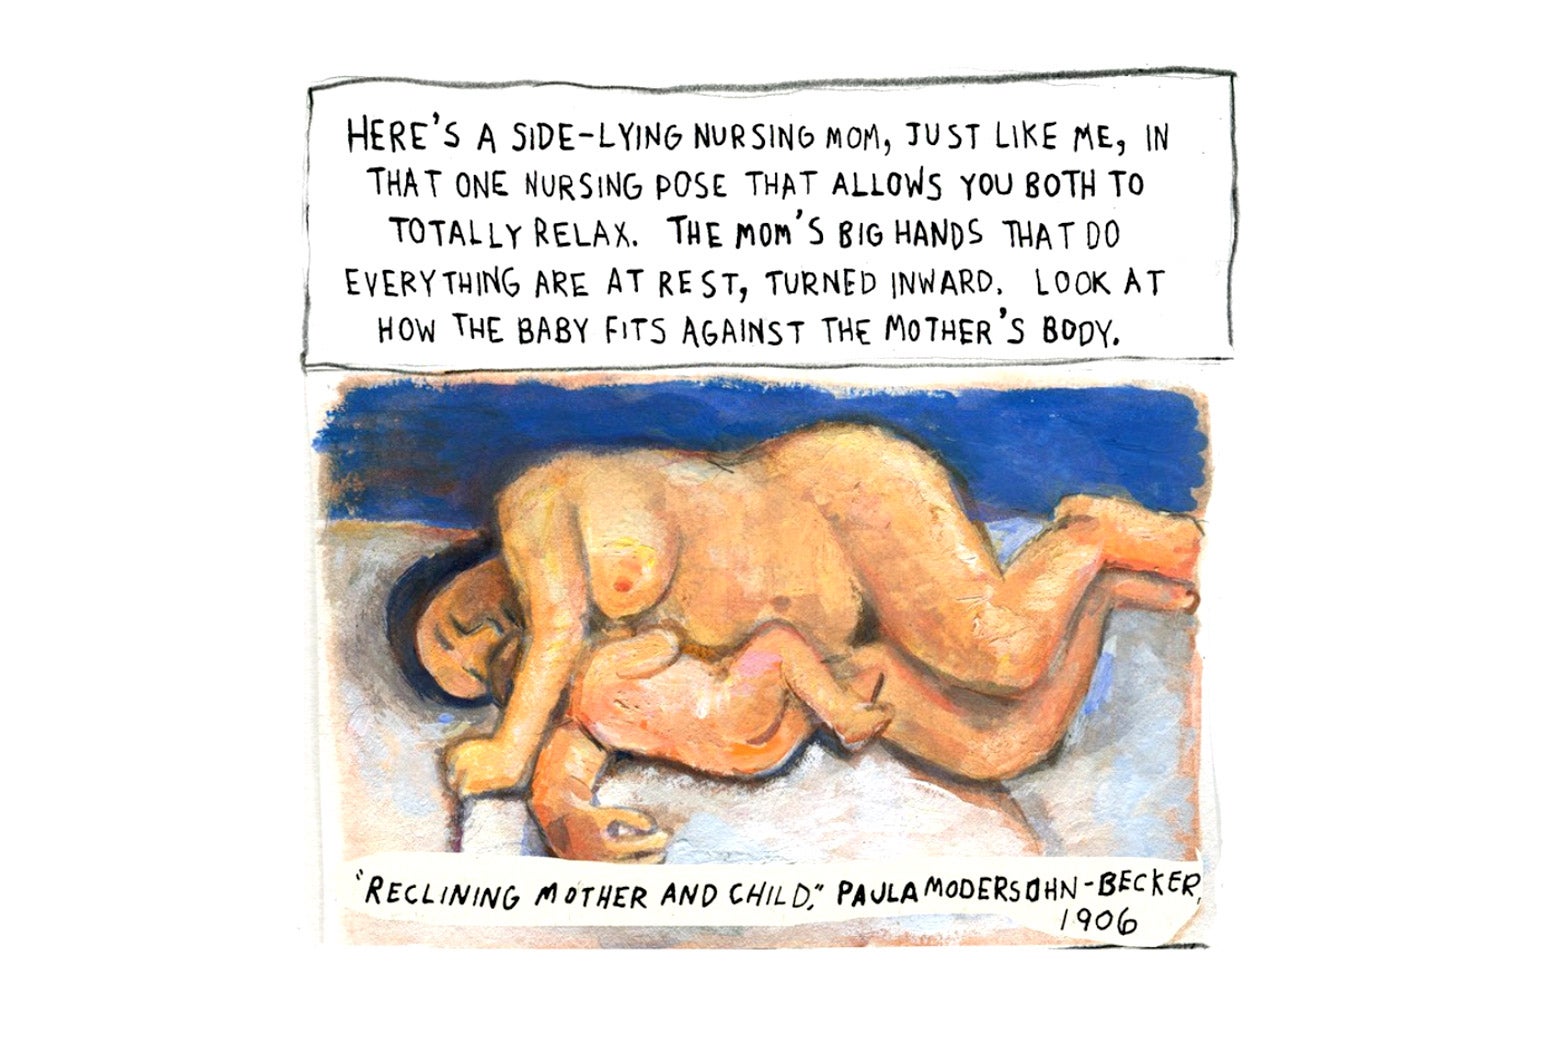 A cartoon of a reclining mother with her child.